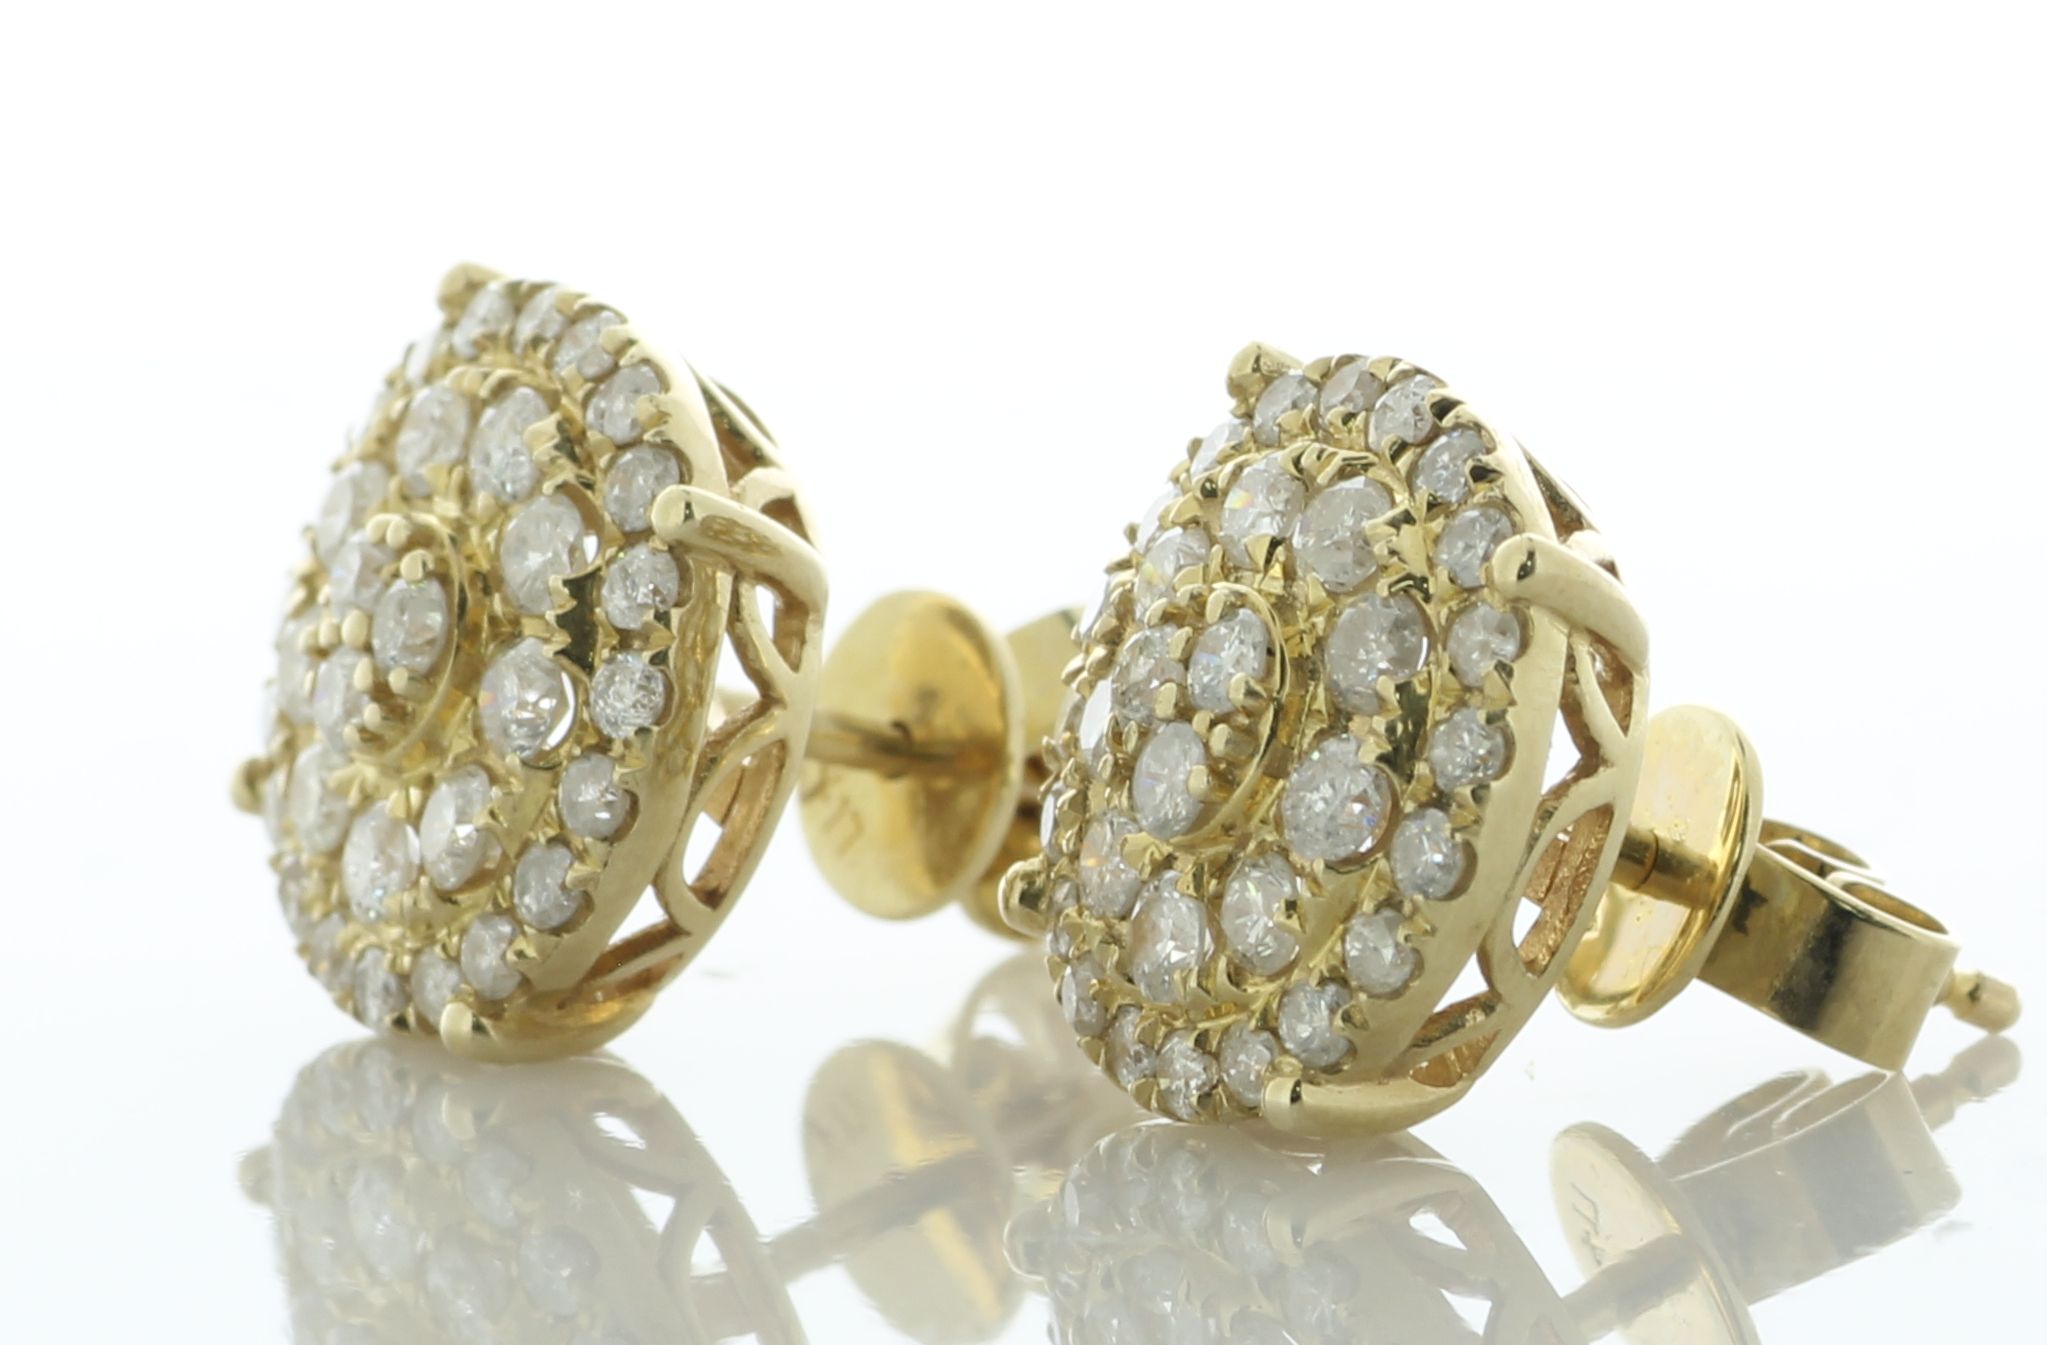 9ct Yellow Gold Round Cluster Diamond Stud Earring 1.35 Carats - Image 3 of 5